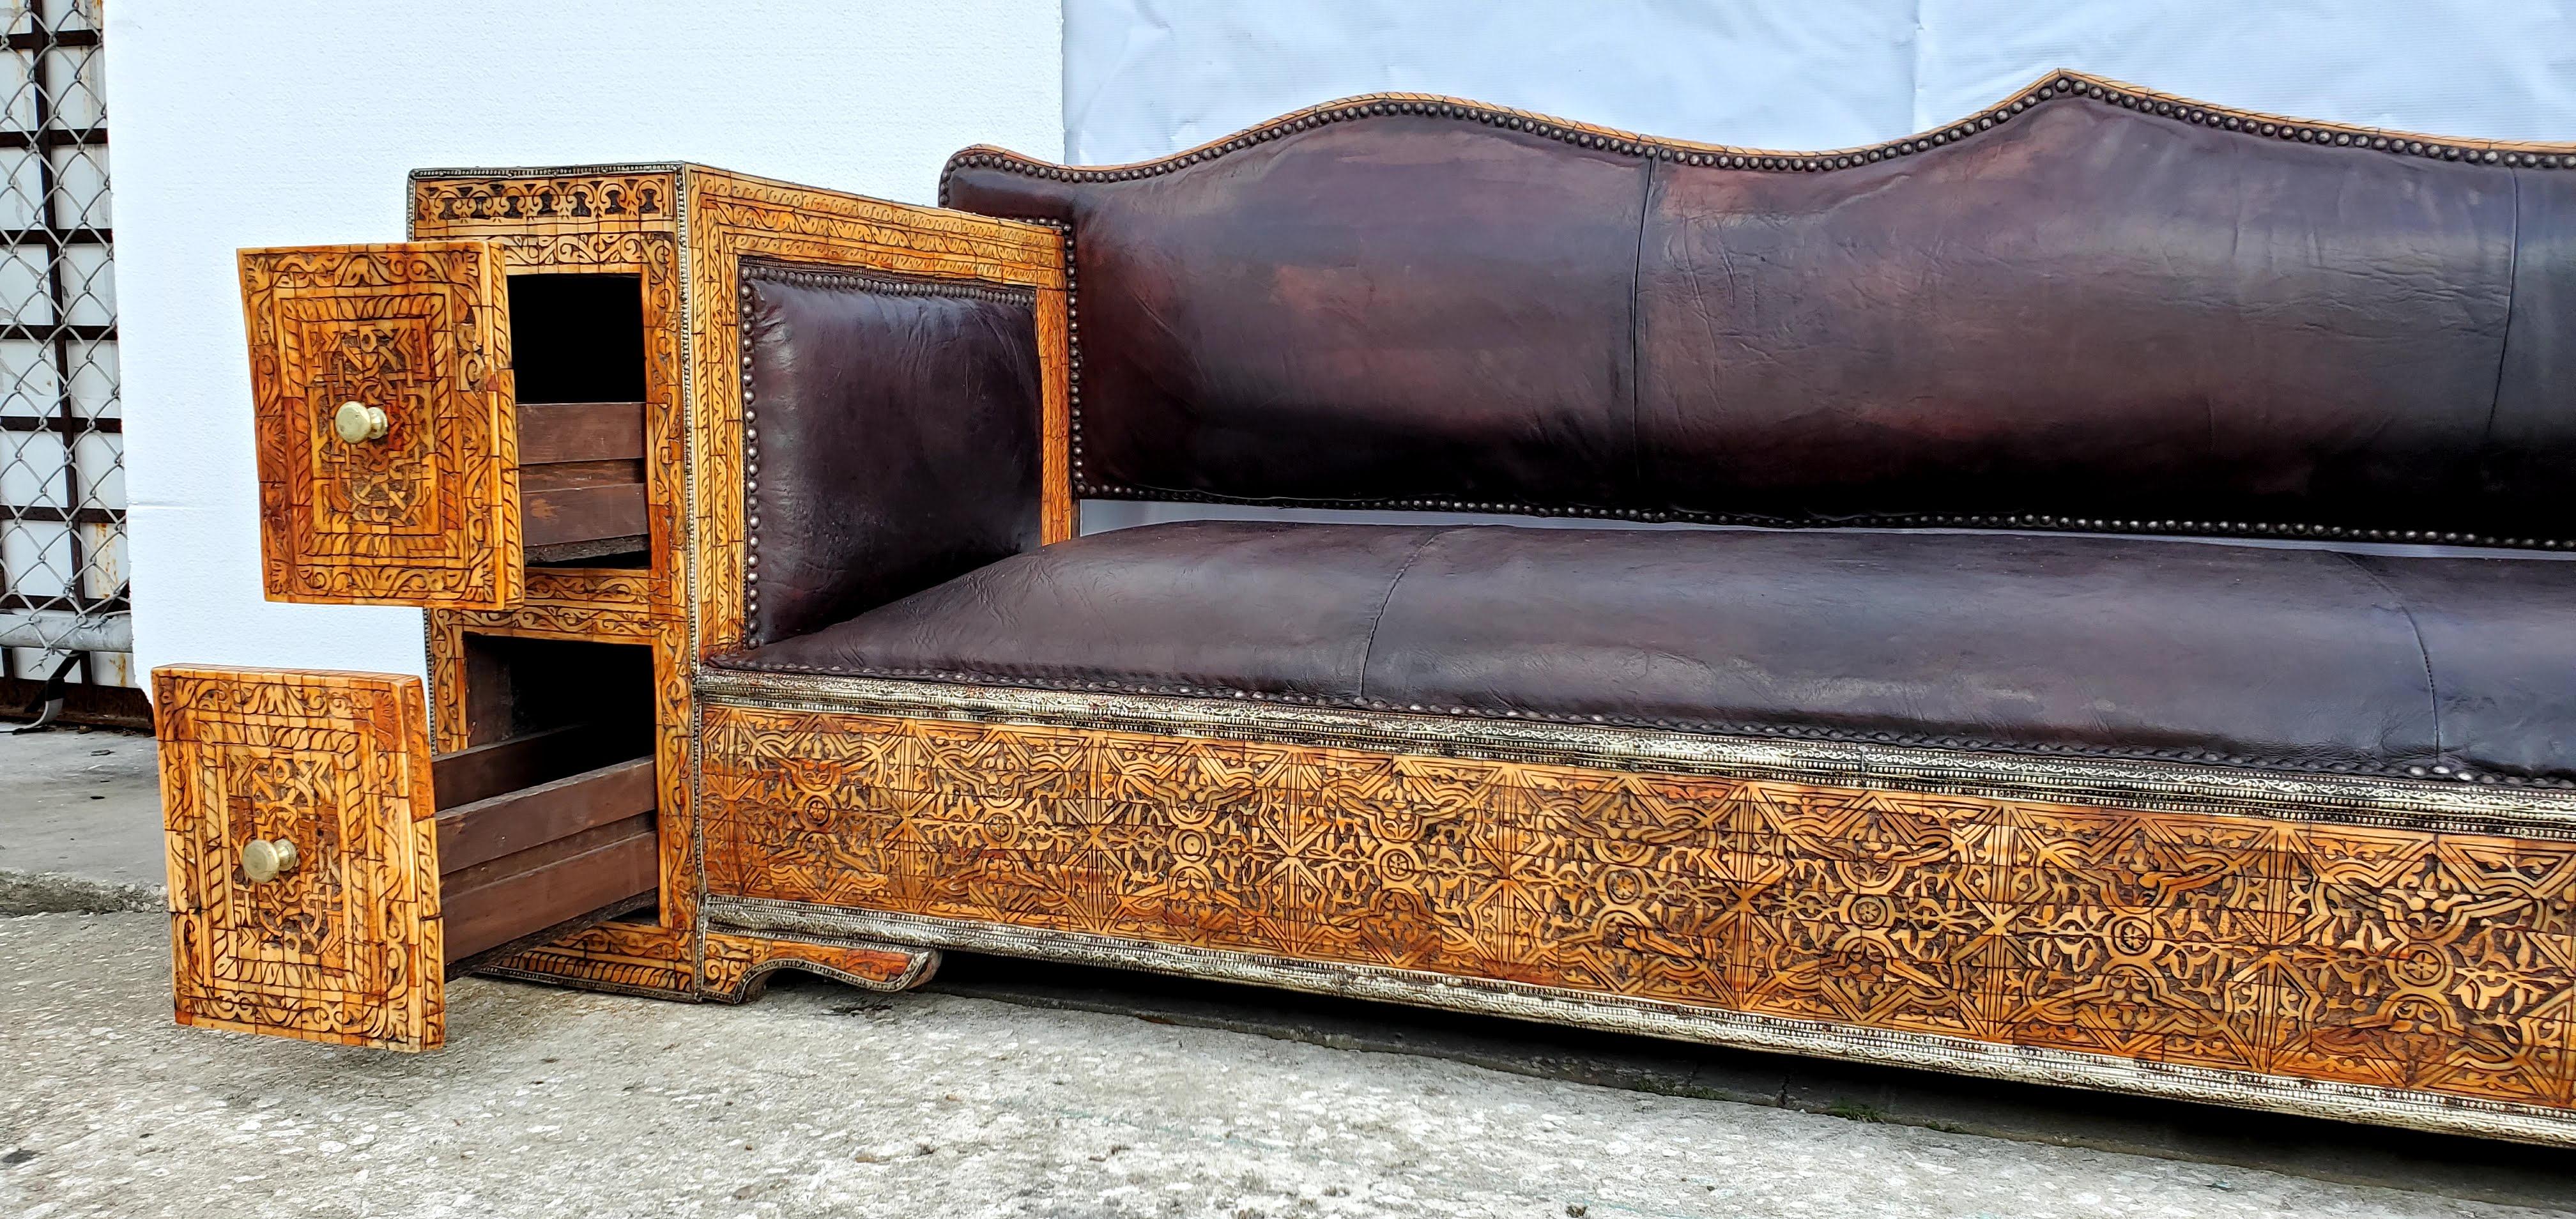 Rare and unique sofa or bench
A statement piece! Perfect for a sitting room, library or office! 
Inlaid camel bone lounge /sofa / bench 
Hand carved henna stained bone. Thick dark hand tanned Moroccan dark leather. 
Handmade in Morocco

Unique